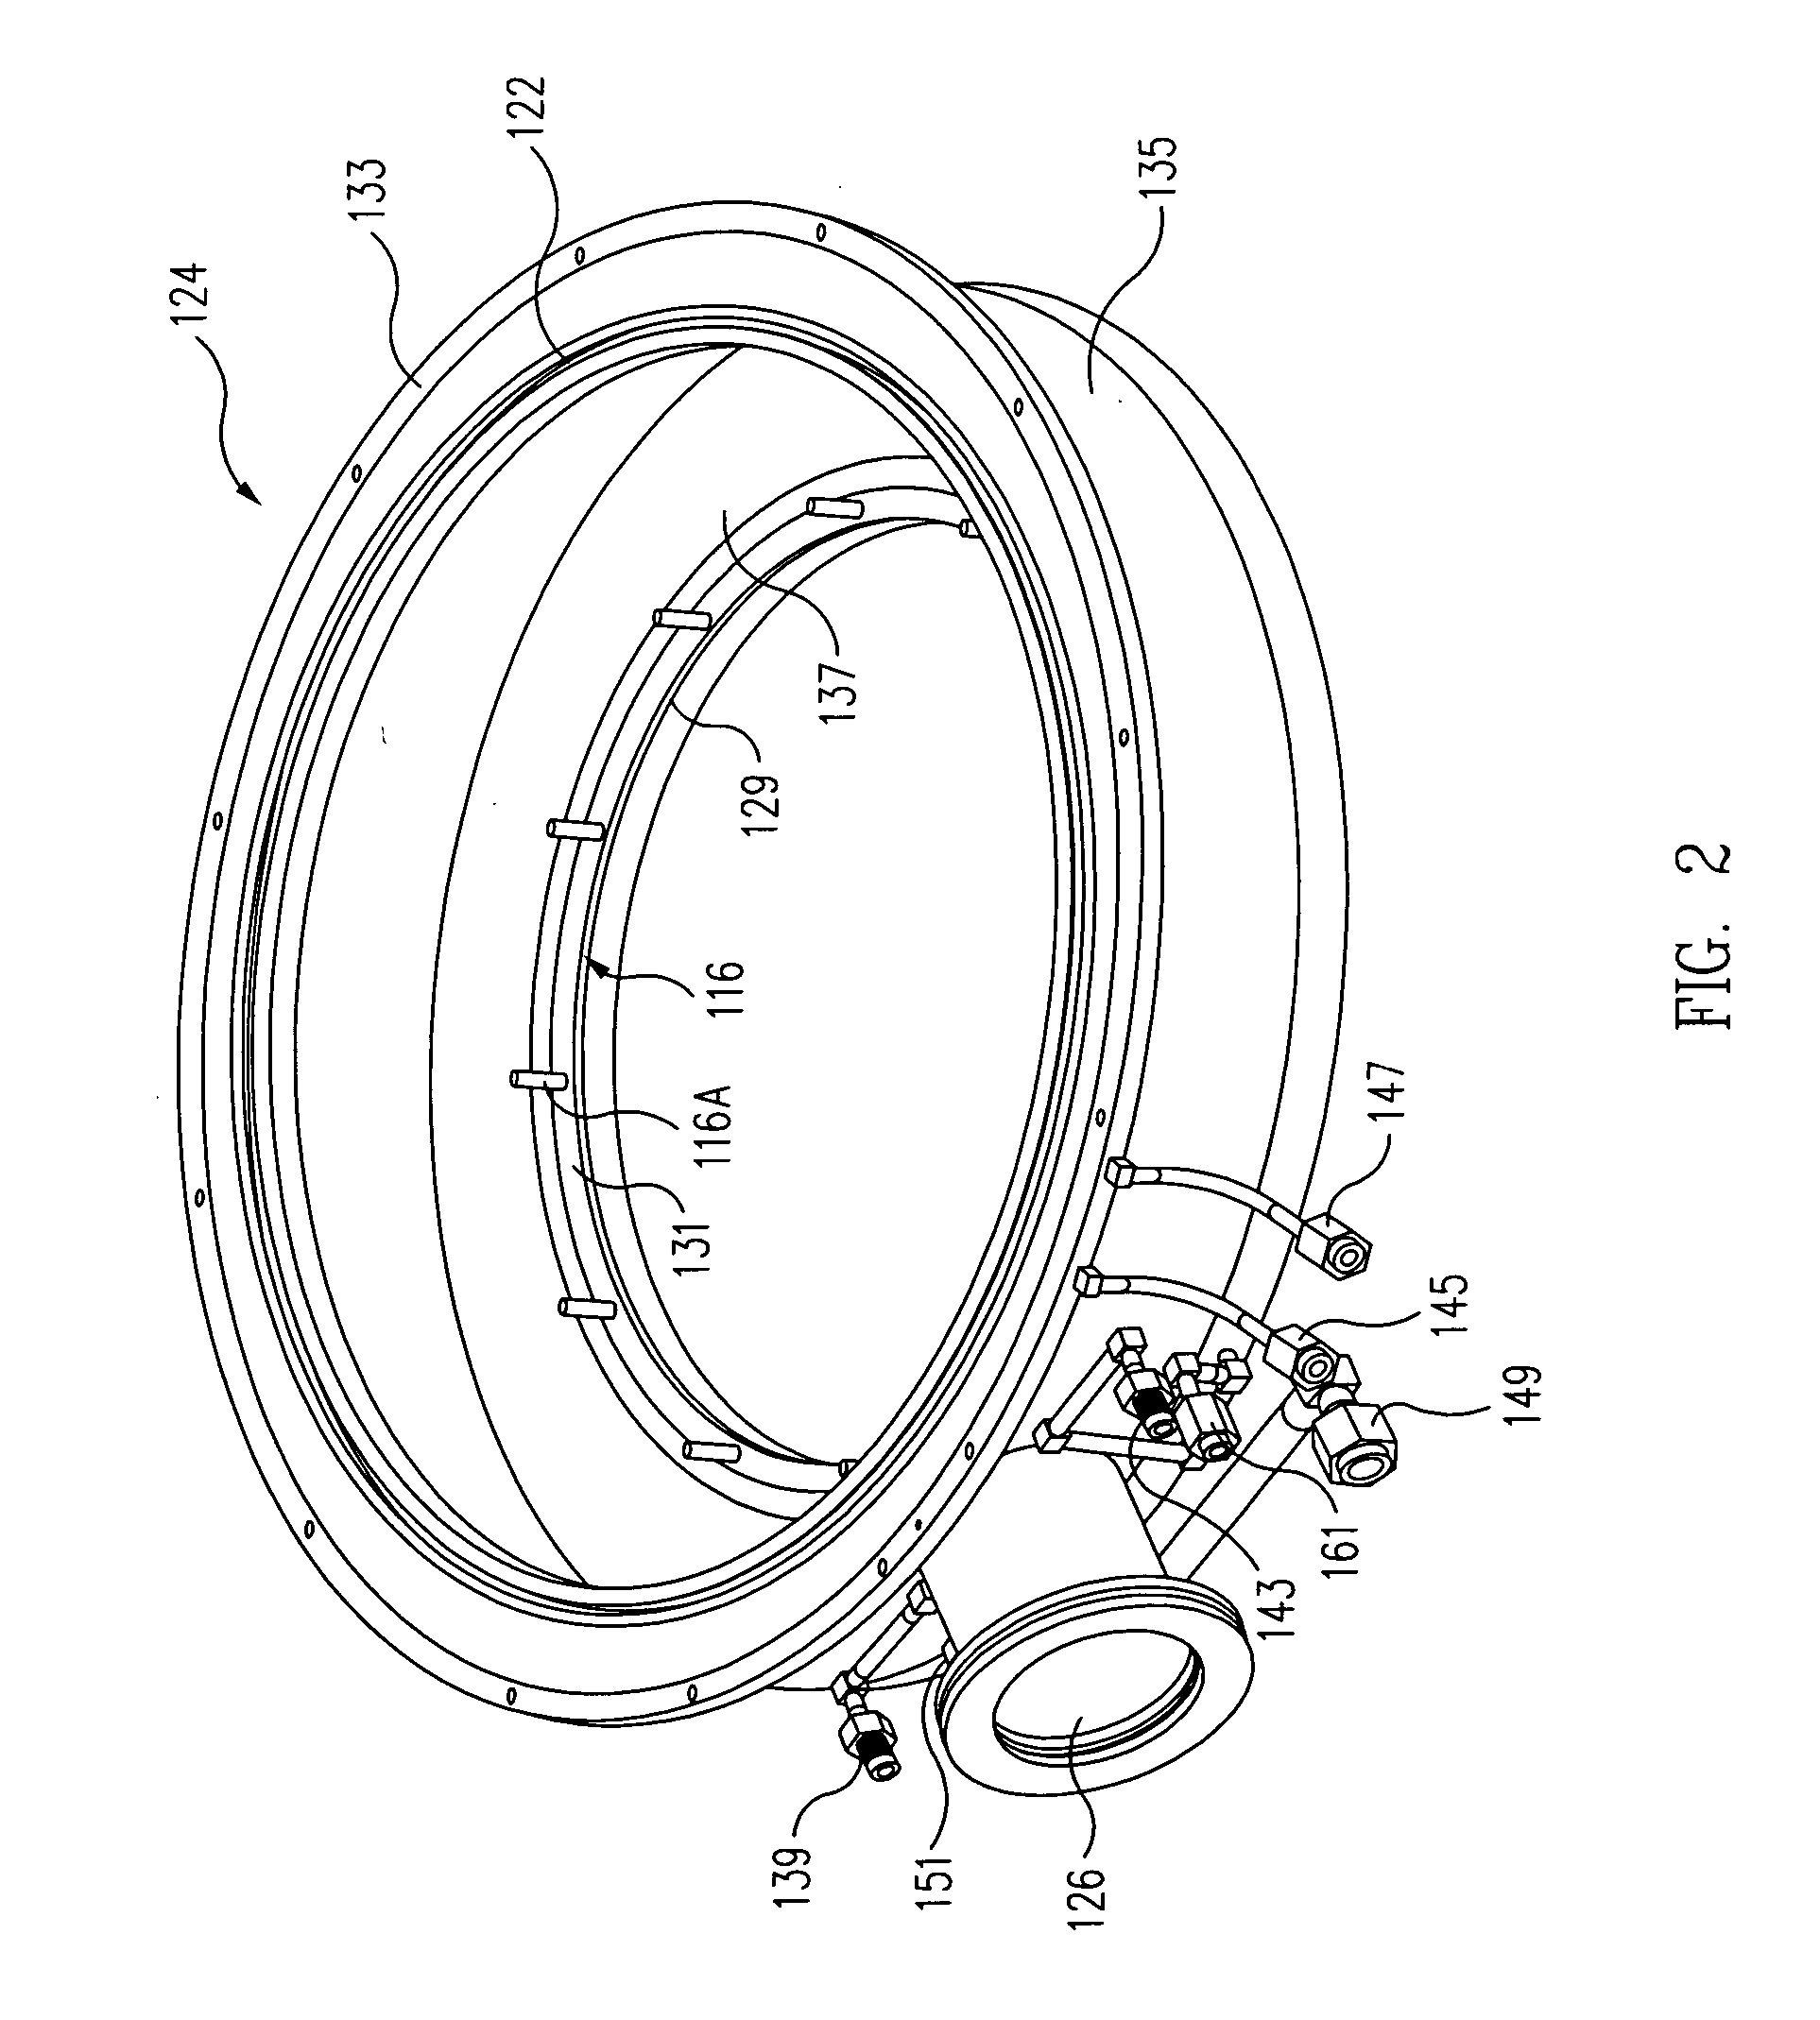 Thermal processing system with cross flow injection system with rotatable injectors